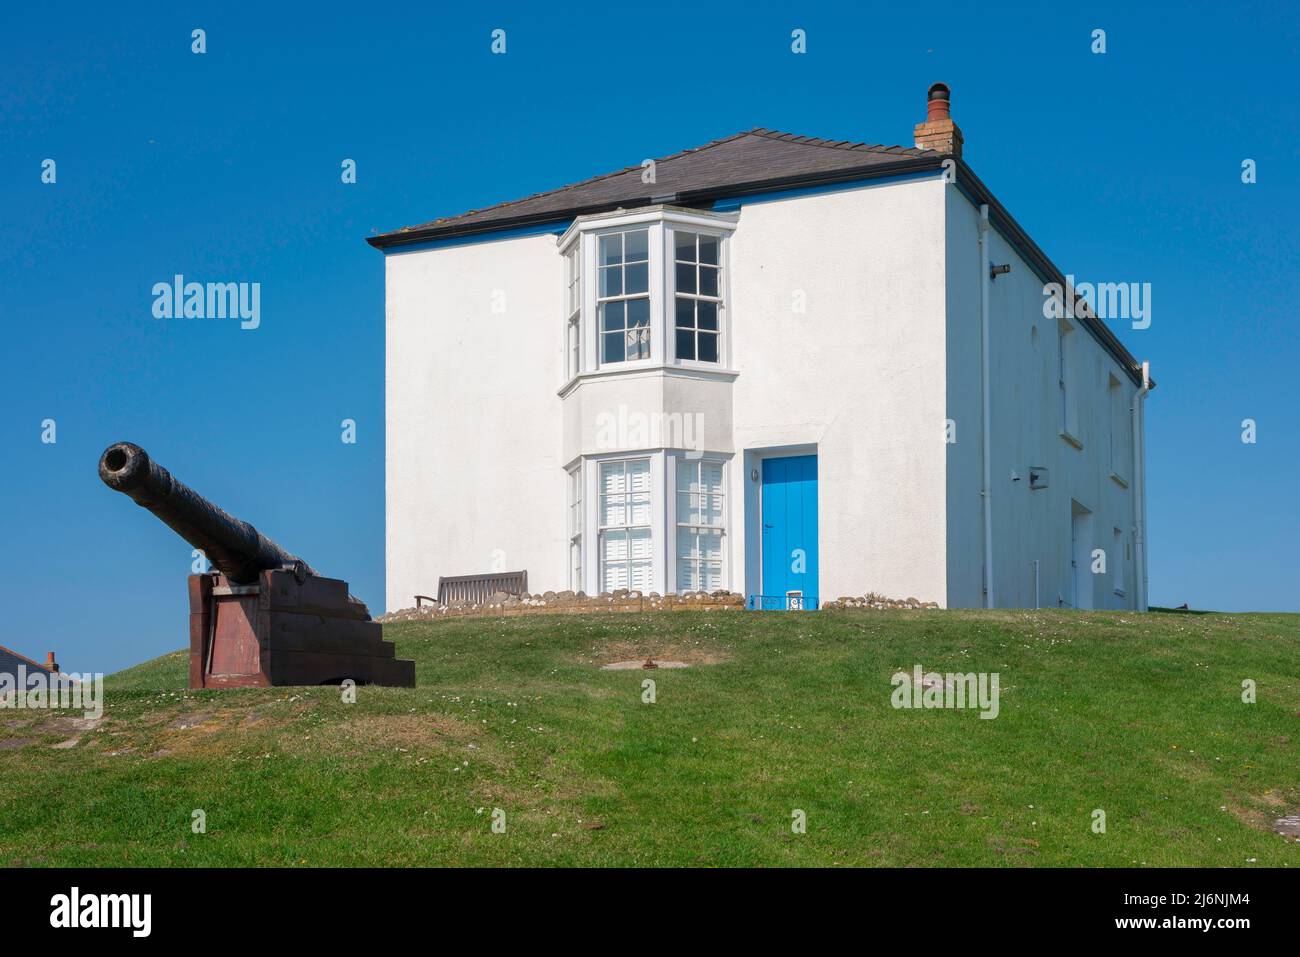 Old Coastguard's House Tenby, view in summer of The Old Coastguard's House sited on Castle Hill in the town of Tenby, Pembrokeshire, Wales, UK Stock Photo